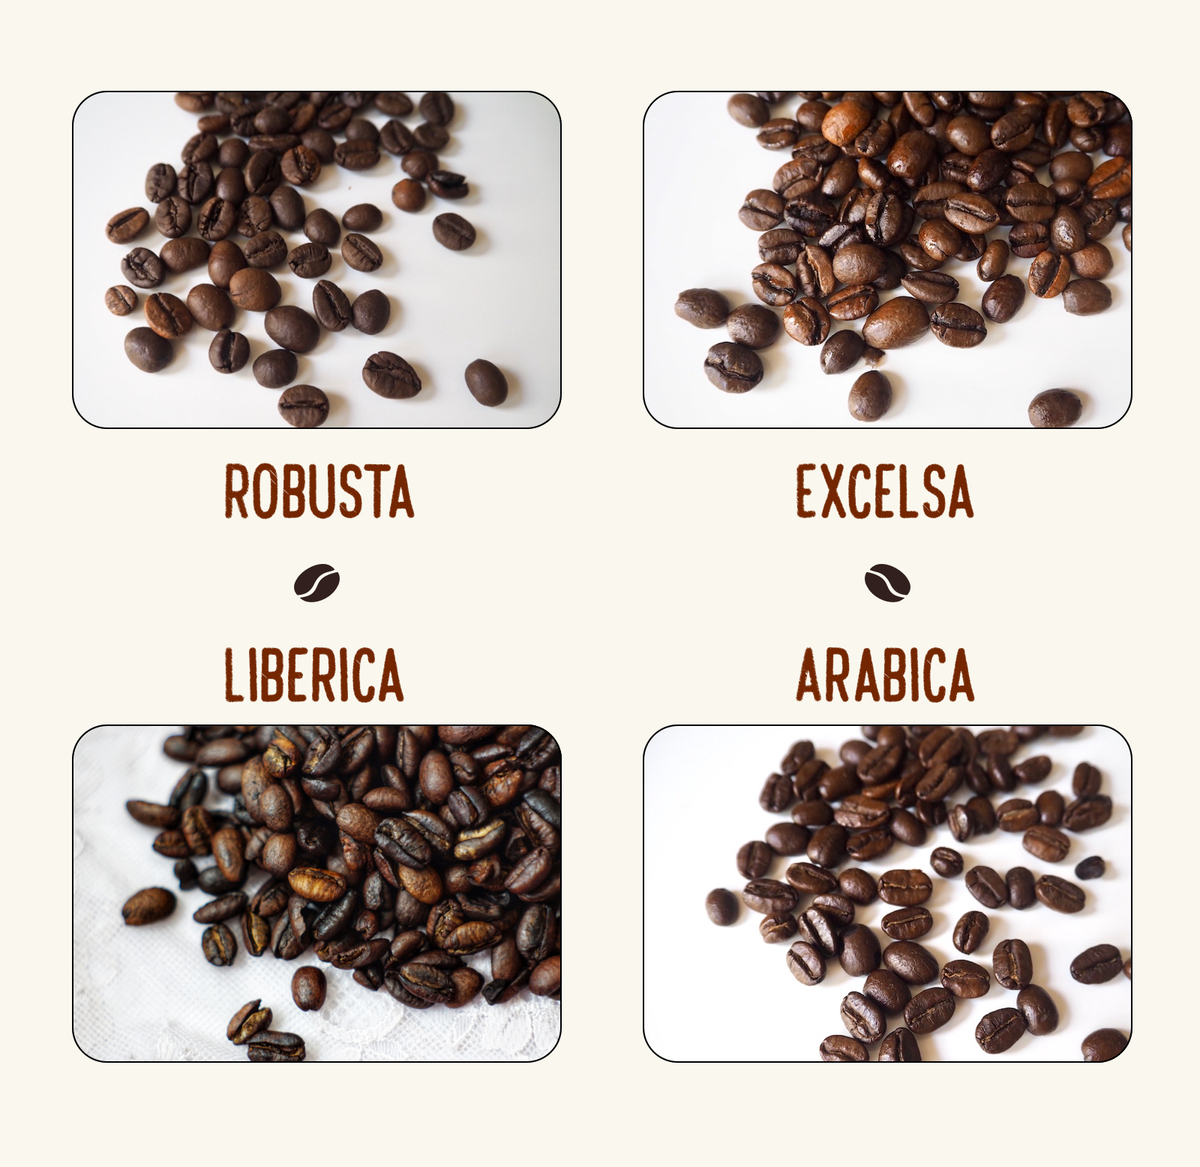 4 types of coffee beans